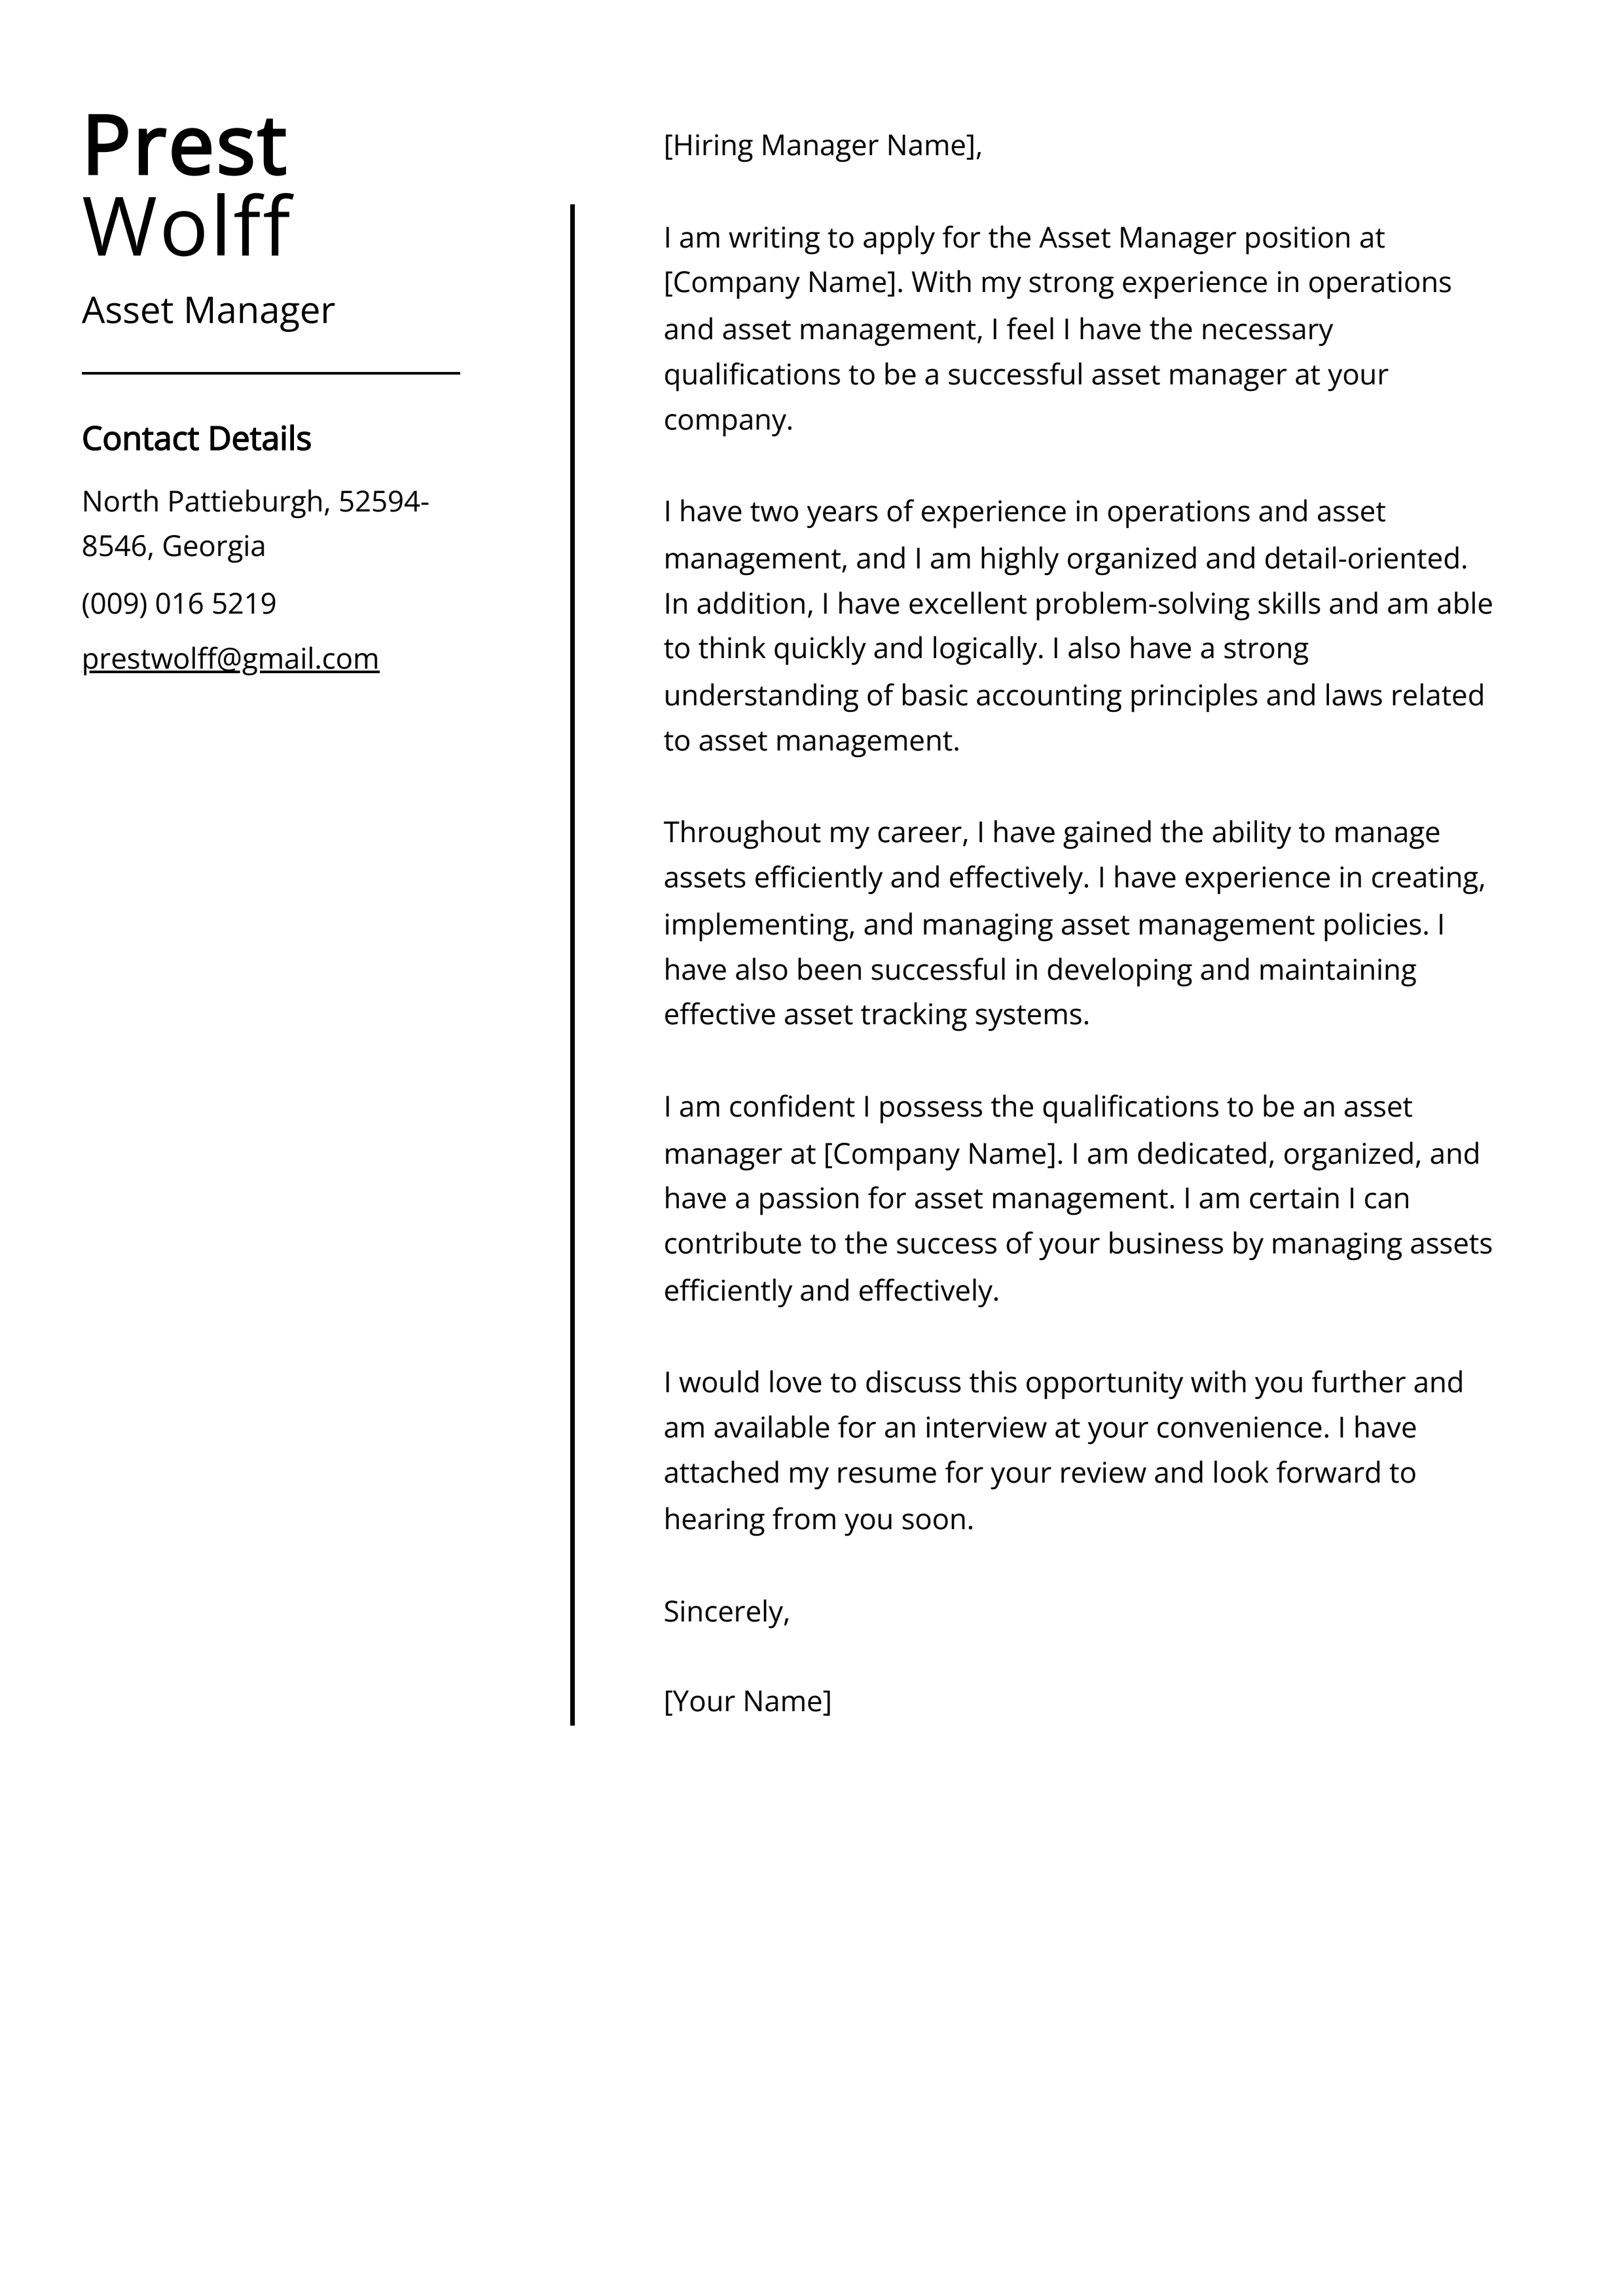 Asset Manager Cover Letter Example